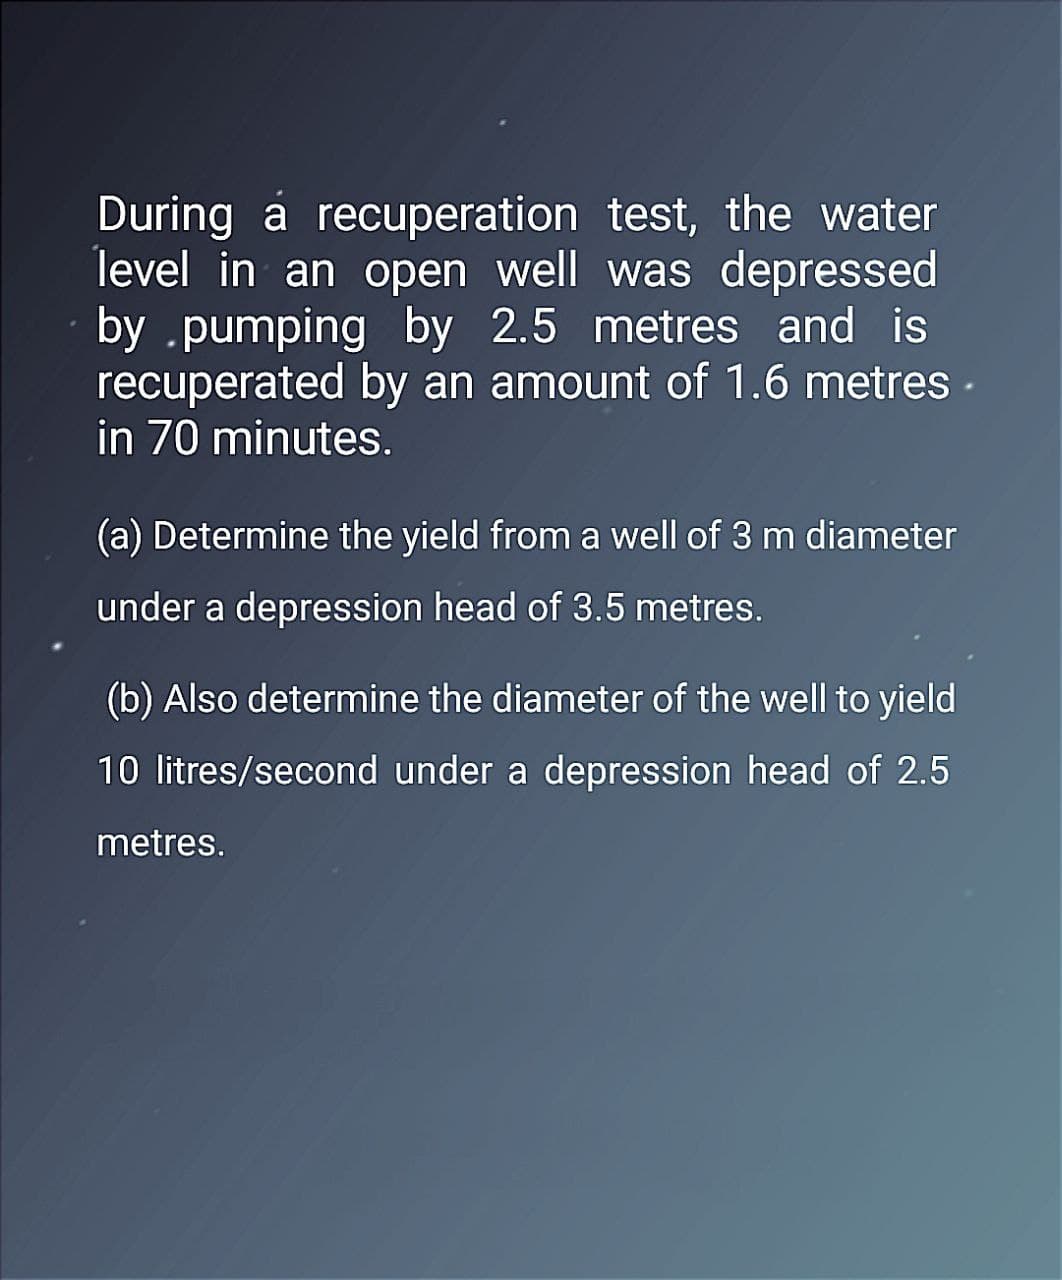 During a recuperation test, the water
level in an open well was depressed
by .pumping by 2.5 metres and is
recuperated by an amount of 1.6 metres.
in 70 minutes.
(a) Determine the yield from a well of 3 m diameter
under a depression head of 3.5 metres.
(b) Also determine the diameter of the well to yield
10 litres/second under a depression head of 2.5
metres.